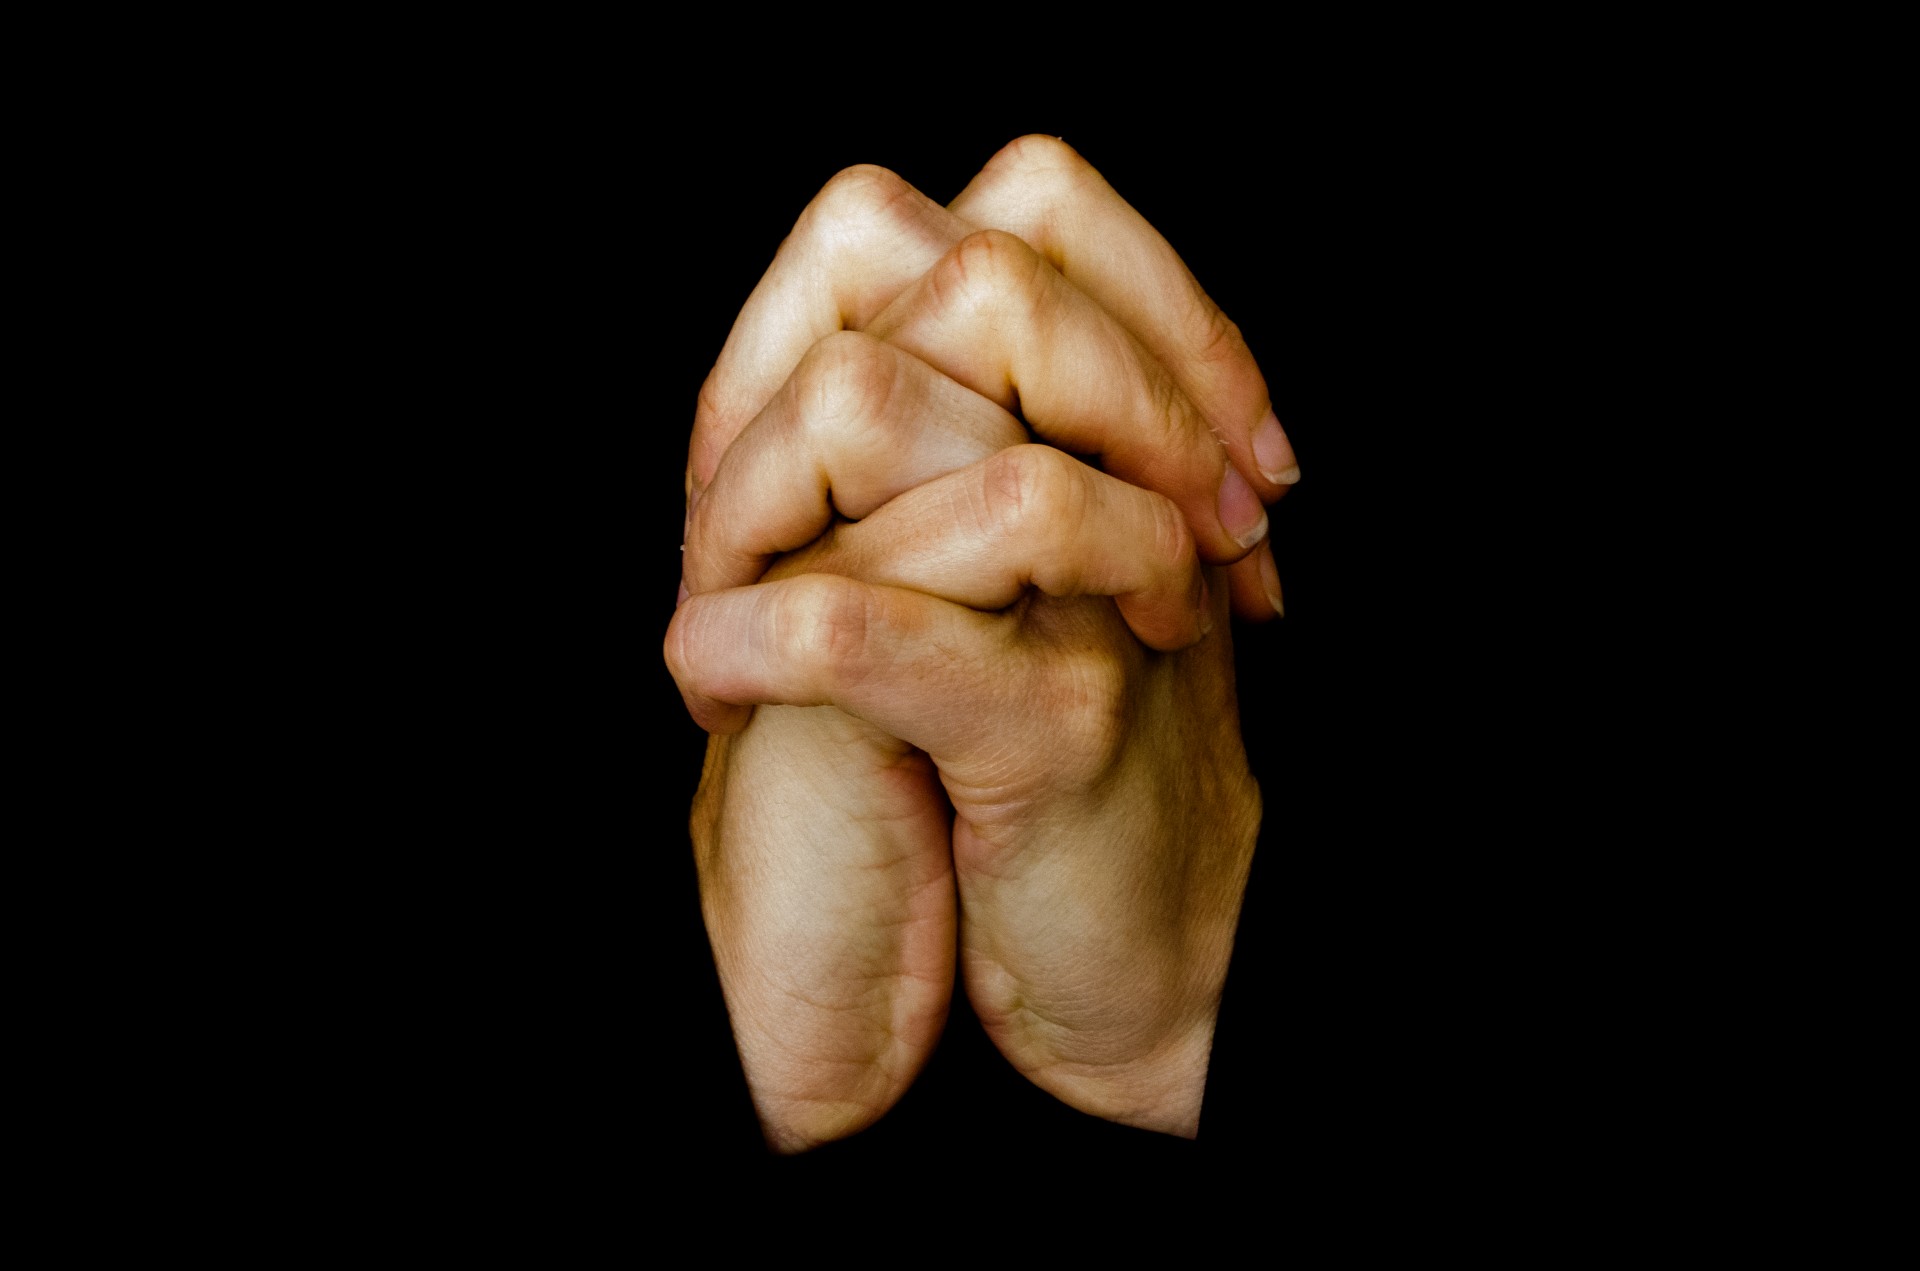 praying-hands-free-stock-photo-public-domain-pictures